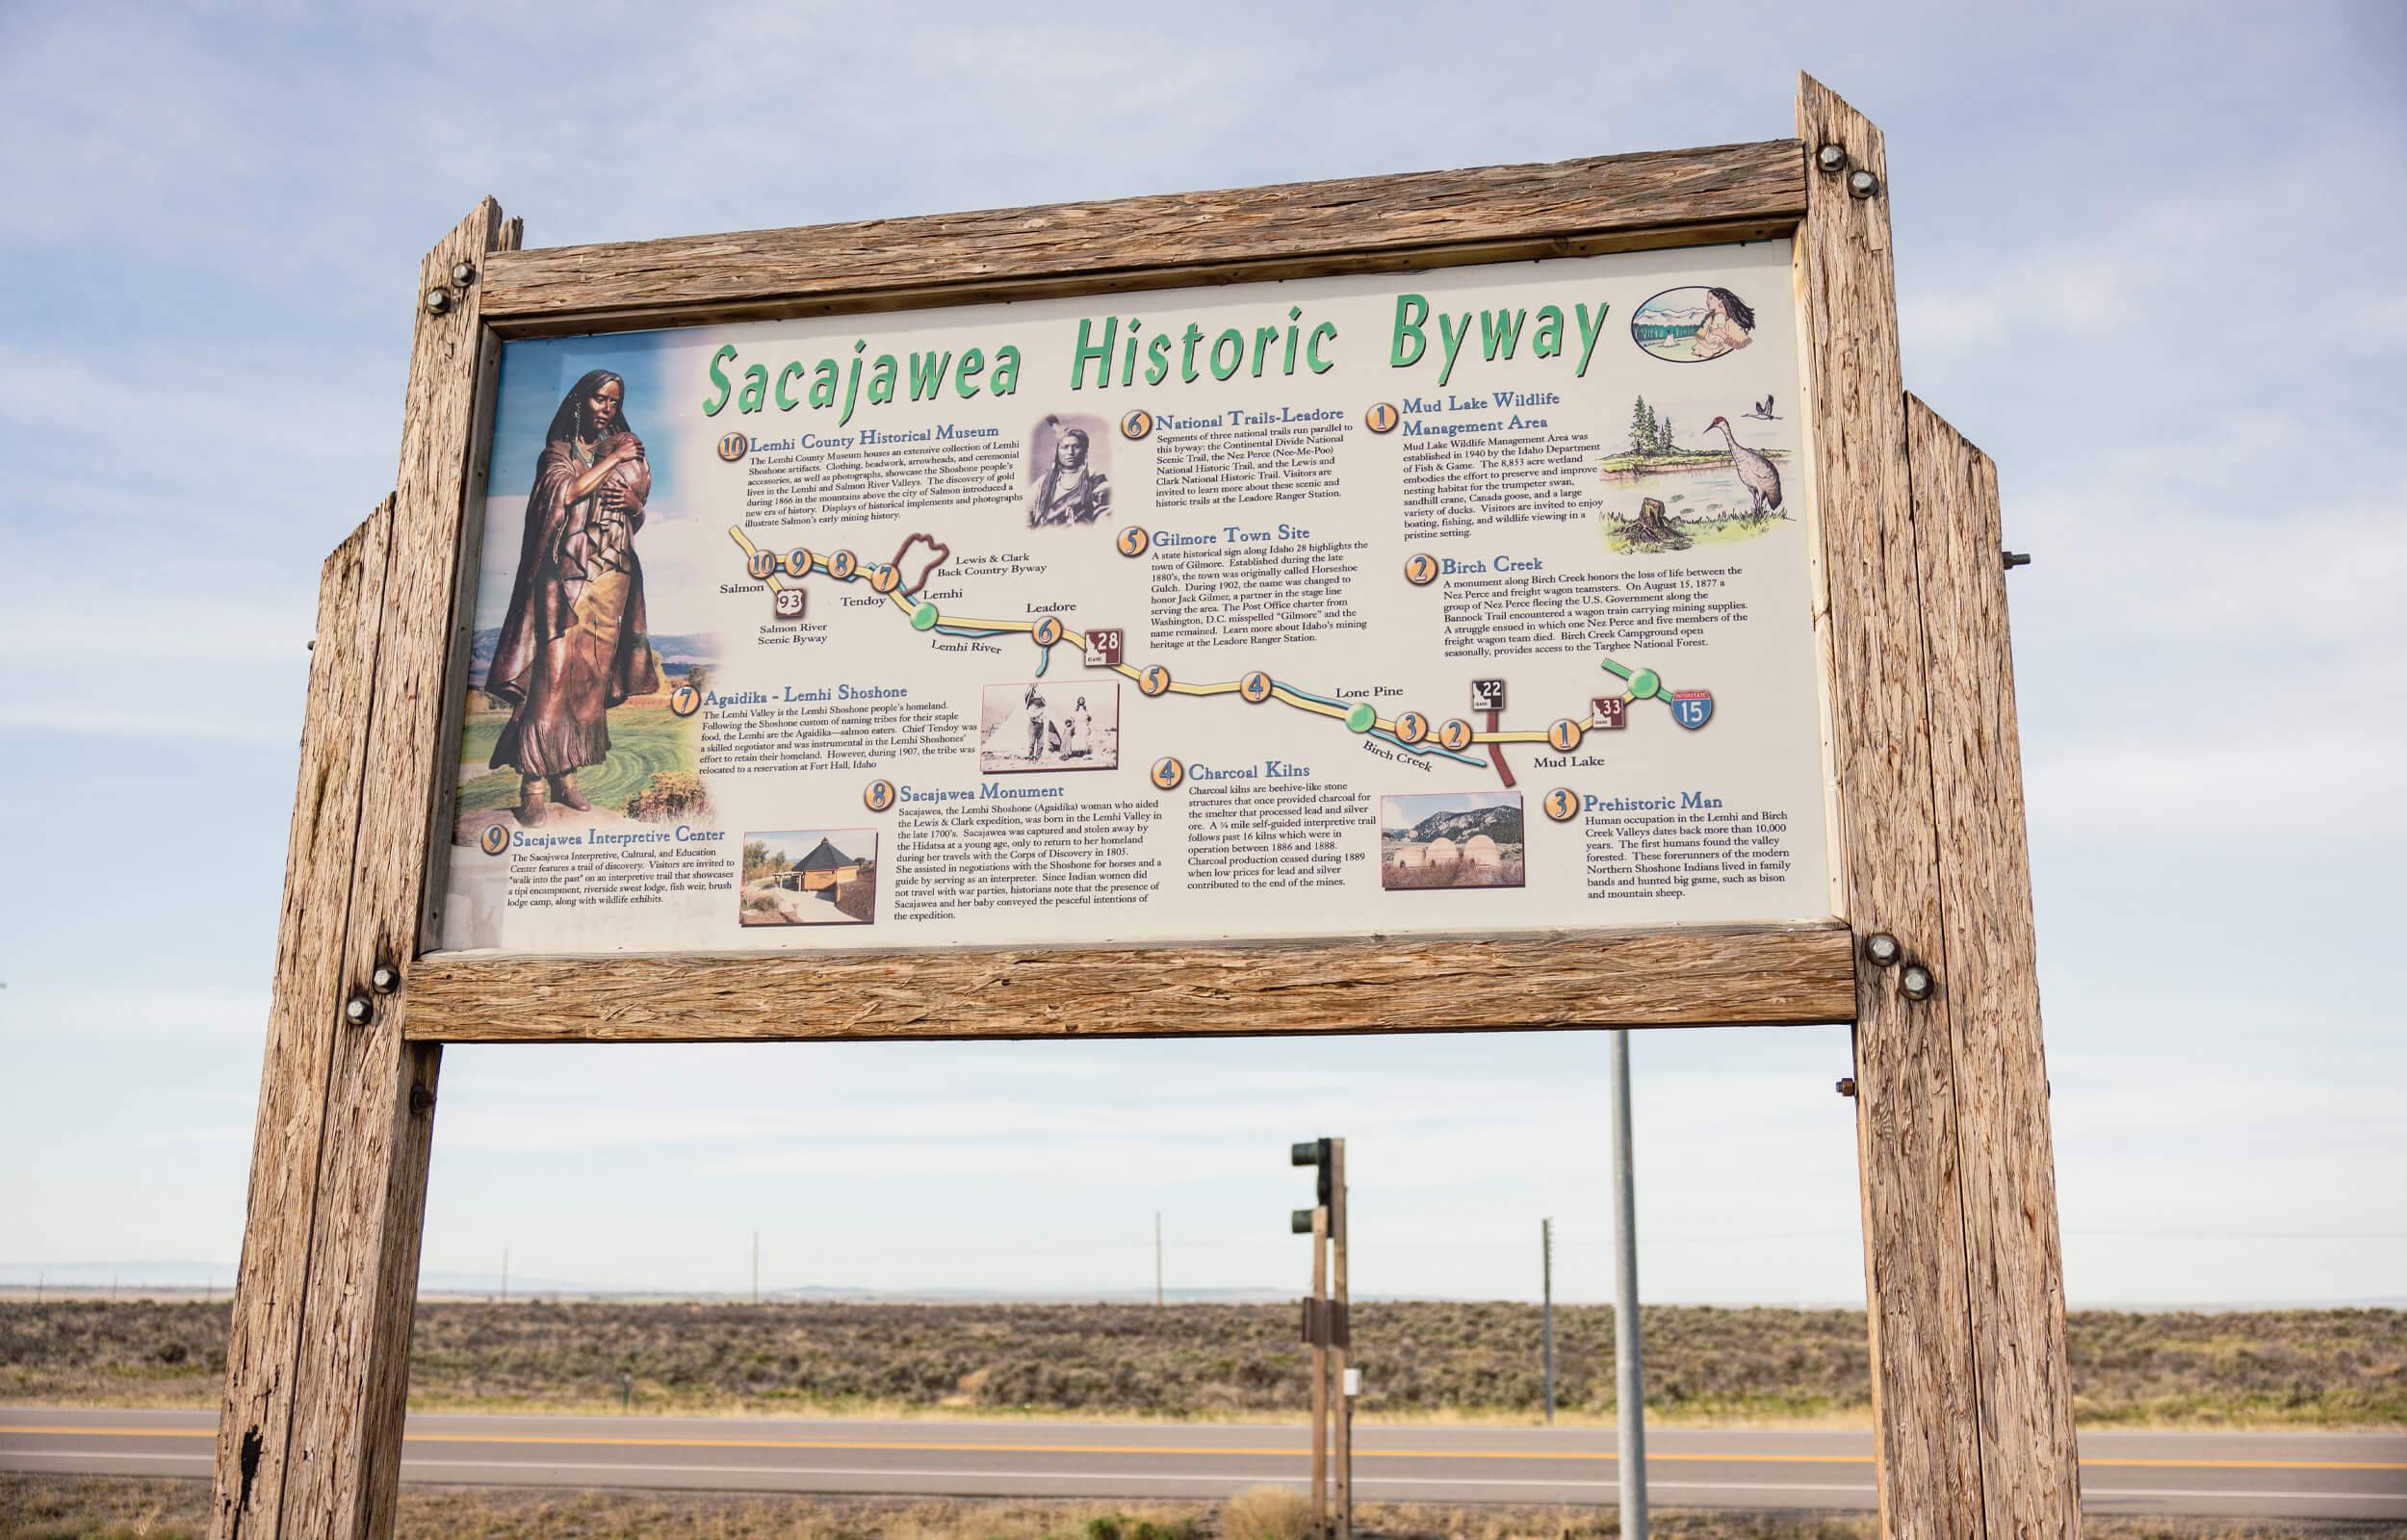 View of a Sacajawea Historic Byway interpretive trail sign.